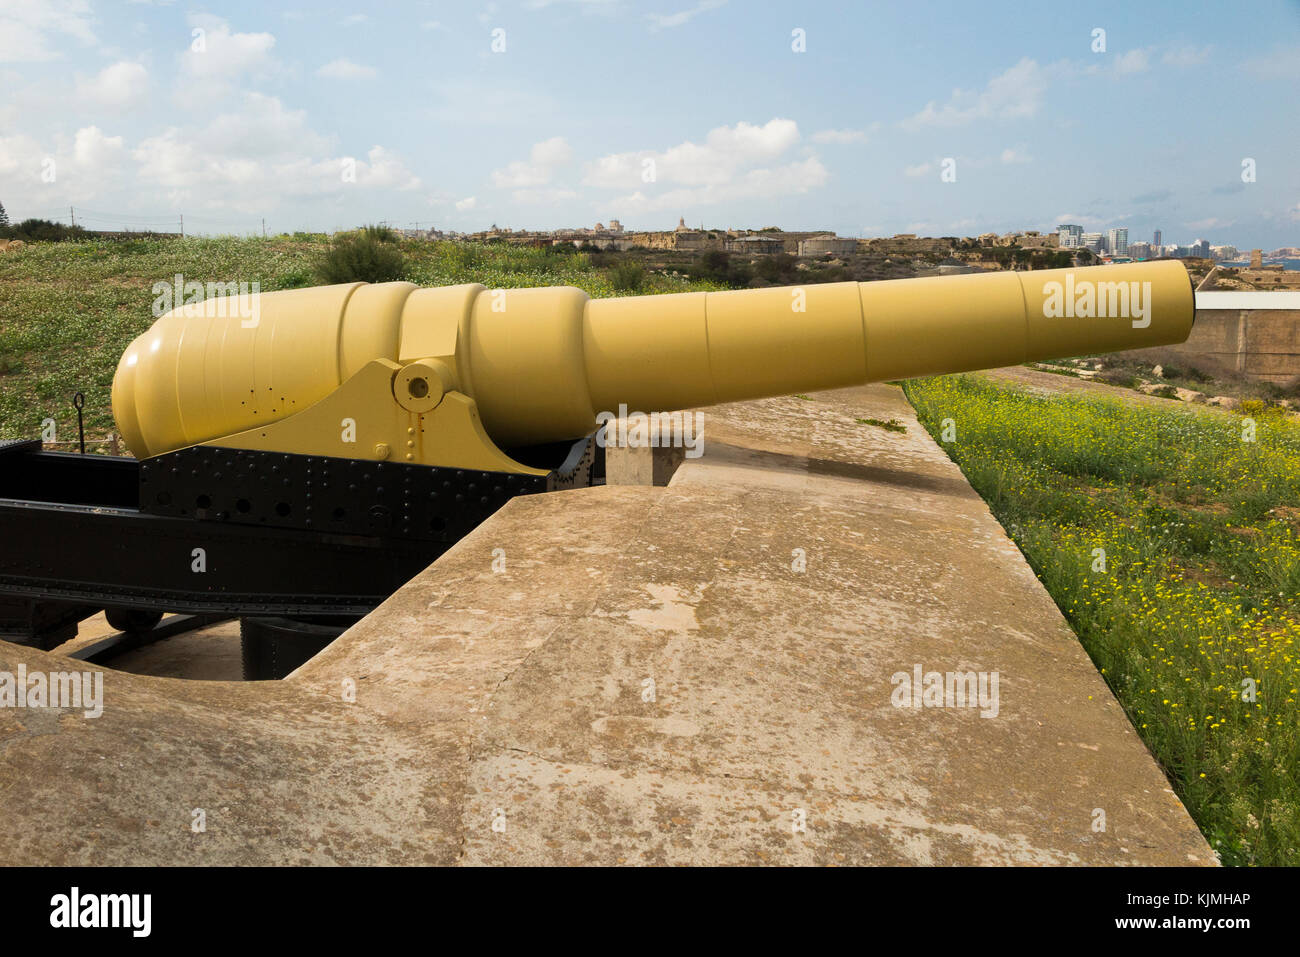 The Armstrong 100 ton gun at Fort Rinella, Malta. The muzzle loading 100 ton  gun is the largest front loading cannon / gun battery in the world. (91  Stock Photo - Alamy